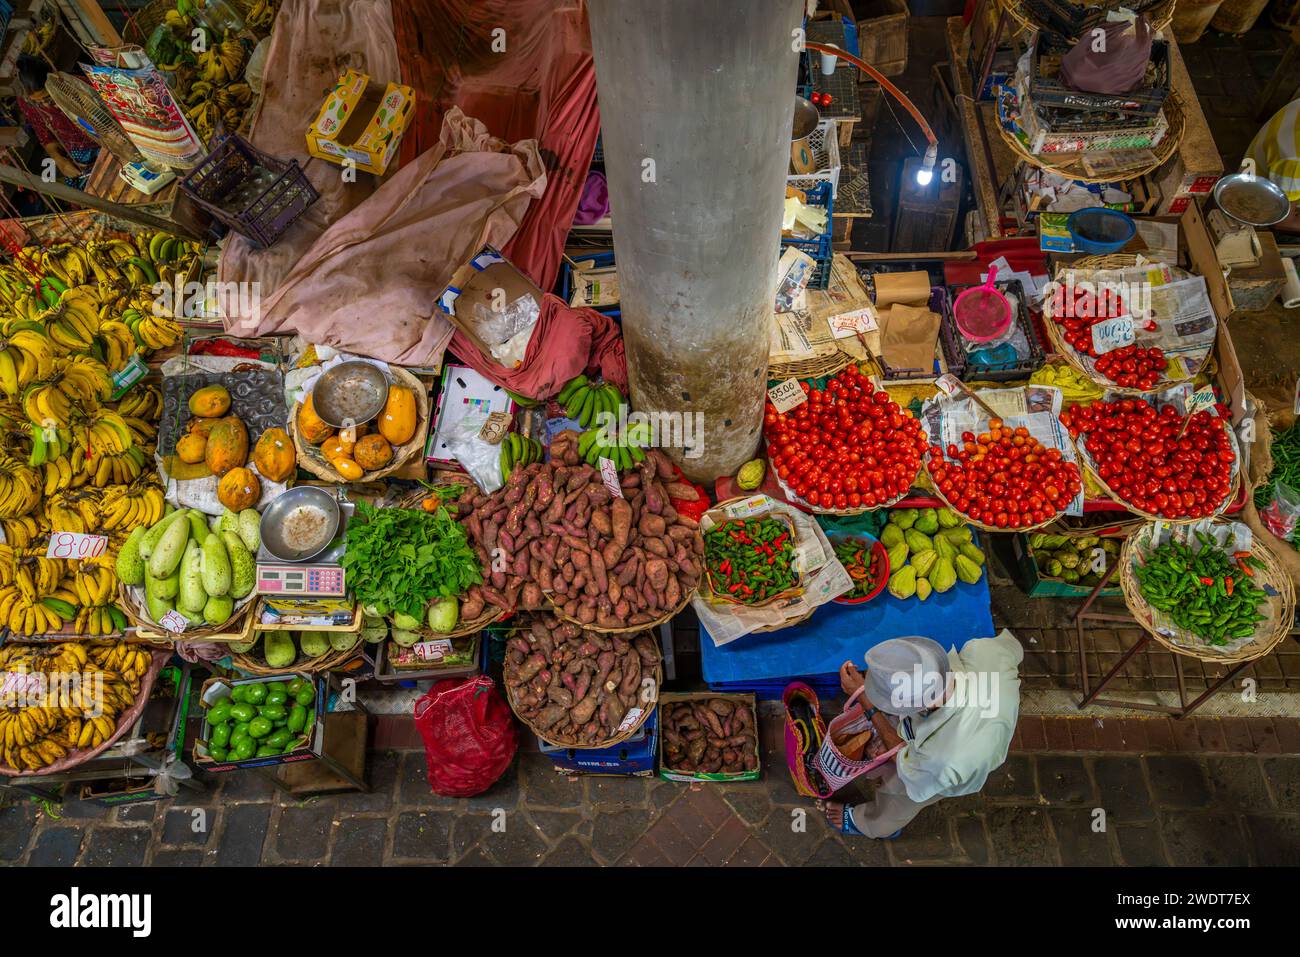 View of food produce and market stalls in Central Market in Port Louis, Port Louis, Mauritius, Indian Ocean, Africa Stock Photo